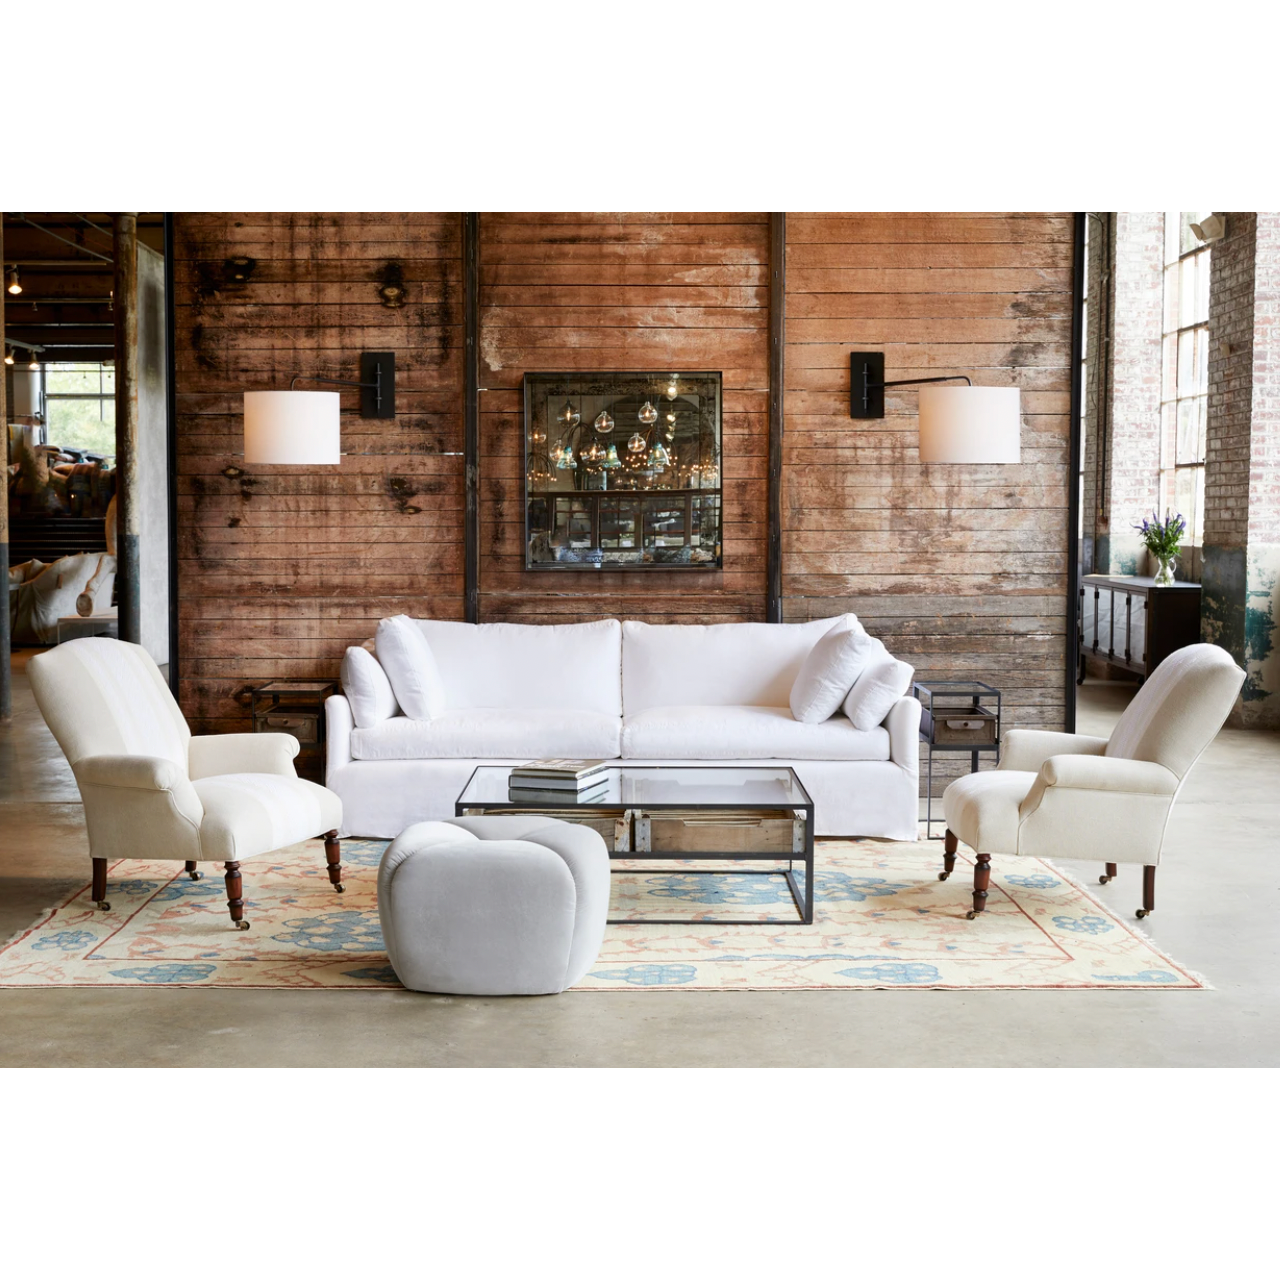 The Lanister Sofa by Cisco Brothers refreshes your space with a hint of modern style on a classic silhouette. A sophisticated design with butterfly stitching on the back cushions and down construction with cloud-like softness. The Lanister Sofa showcases a traditional yet sleek look, with a lasting allure that makes it an instant classic. Photographed in Otis White. 